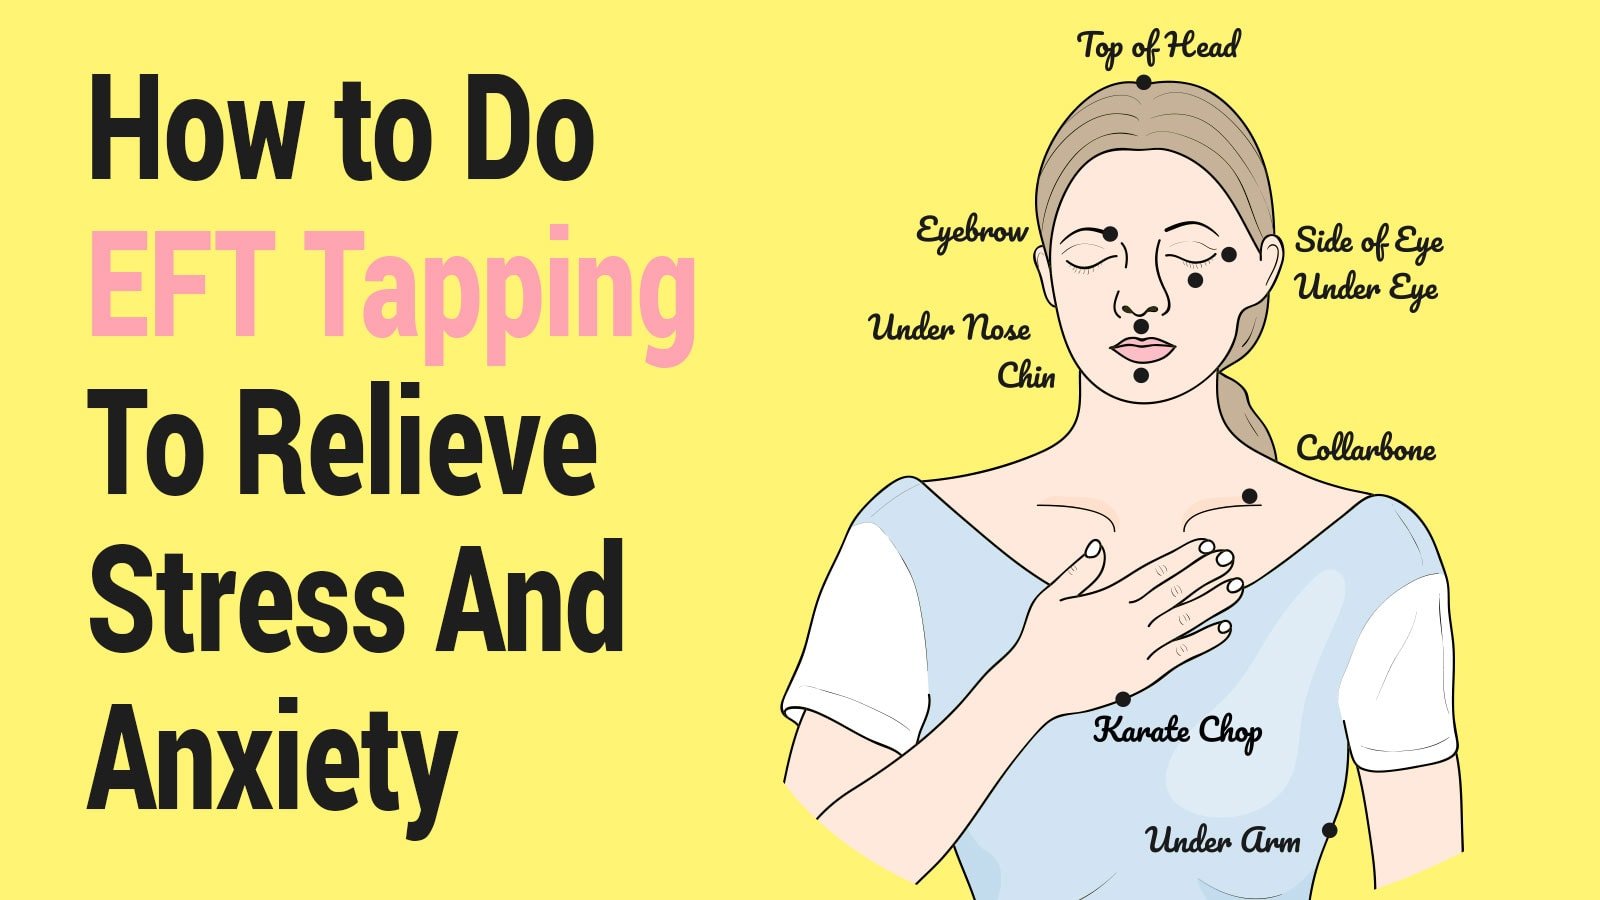 How to Do EFT Tapping To Relieve Stress And Anxiety ...